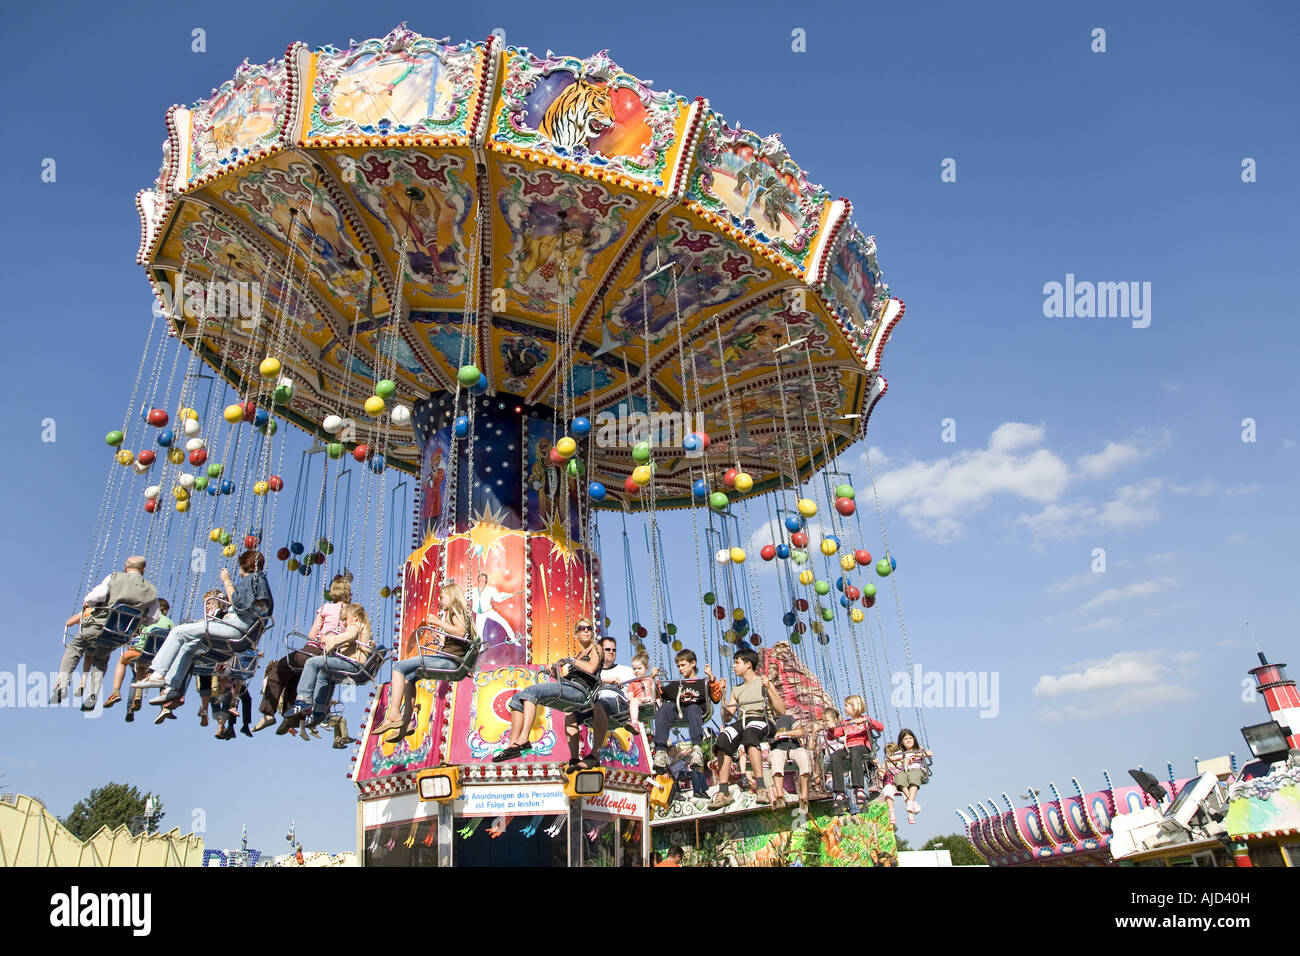 chairoplane on the Cranger fair, Germany, Ruhr Area, Herne Stock Photo